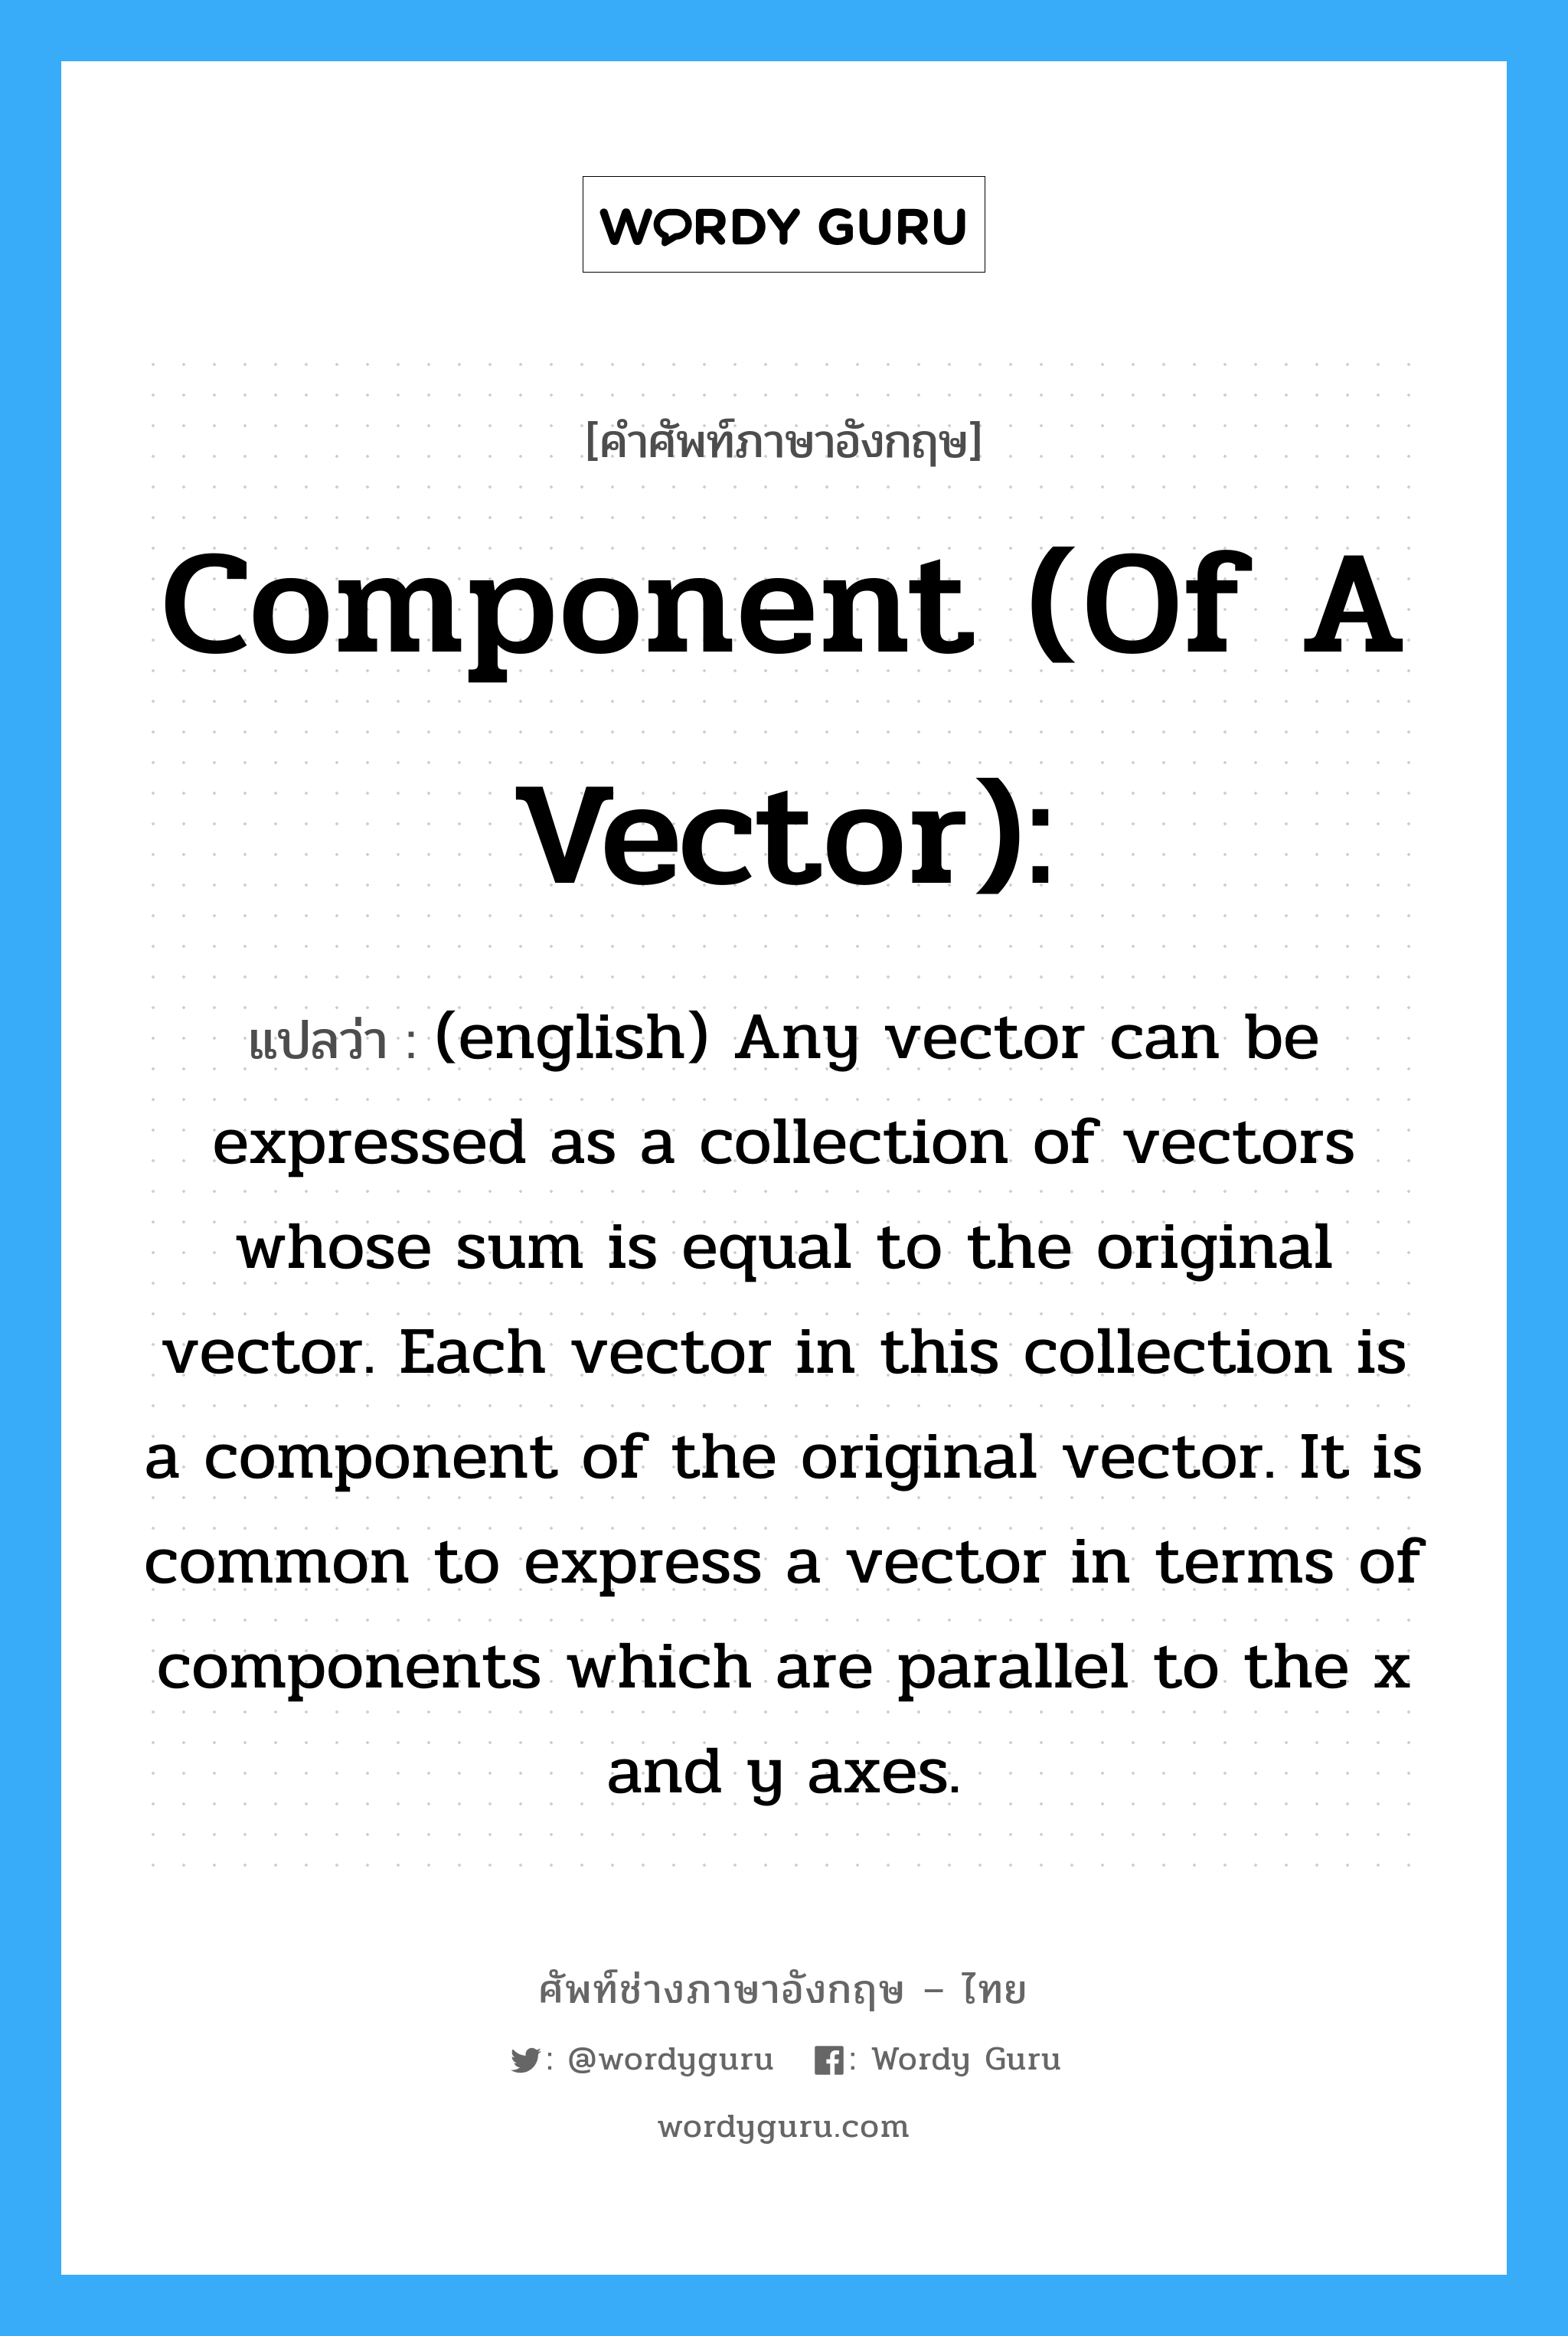 Component (of a vector): แปลว่า?, คำศัพท์ช่างภาษาอังกฤษ - ไทย Component (of a vector): คำศัพท์ภาษาอังกฤษ Component (of a vector): แปลว่า (english) Any vector can be expressed as a collection of vectors whose sum is equal to the original vector. Each vector in this collection is a component of the original vector. It is common to express a vector in terms of components which are parallel to the x and y axes.